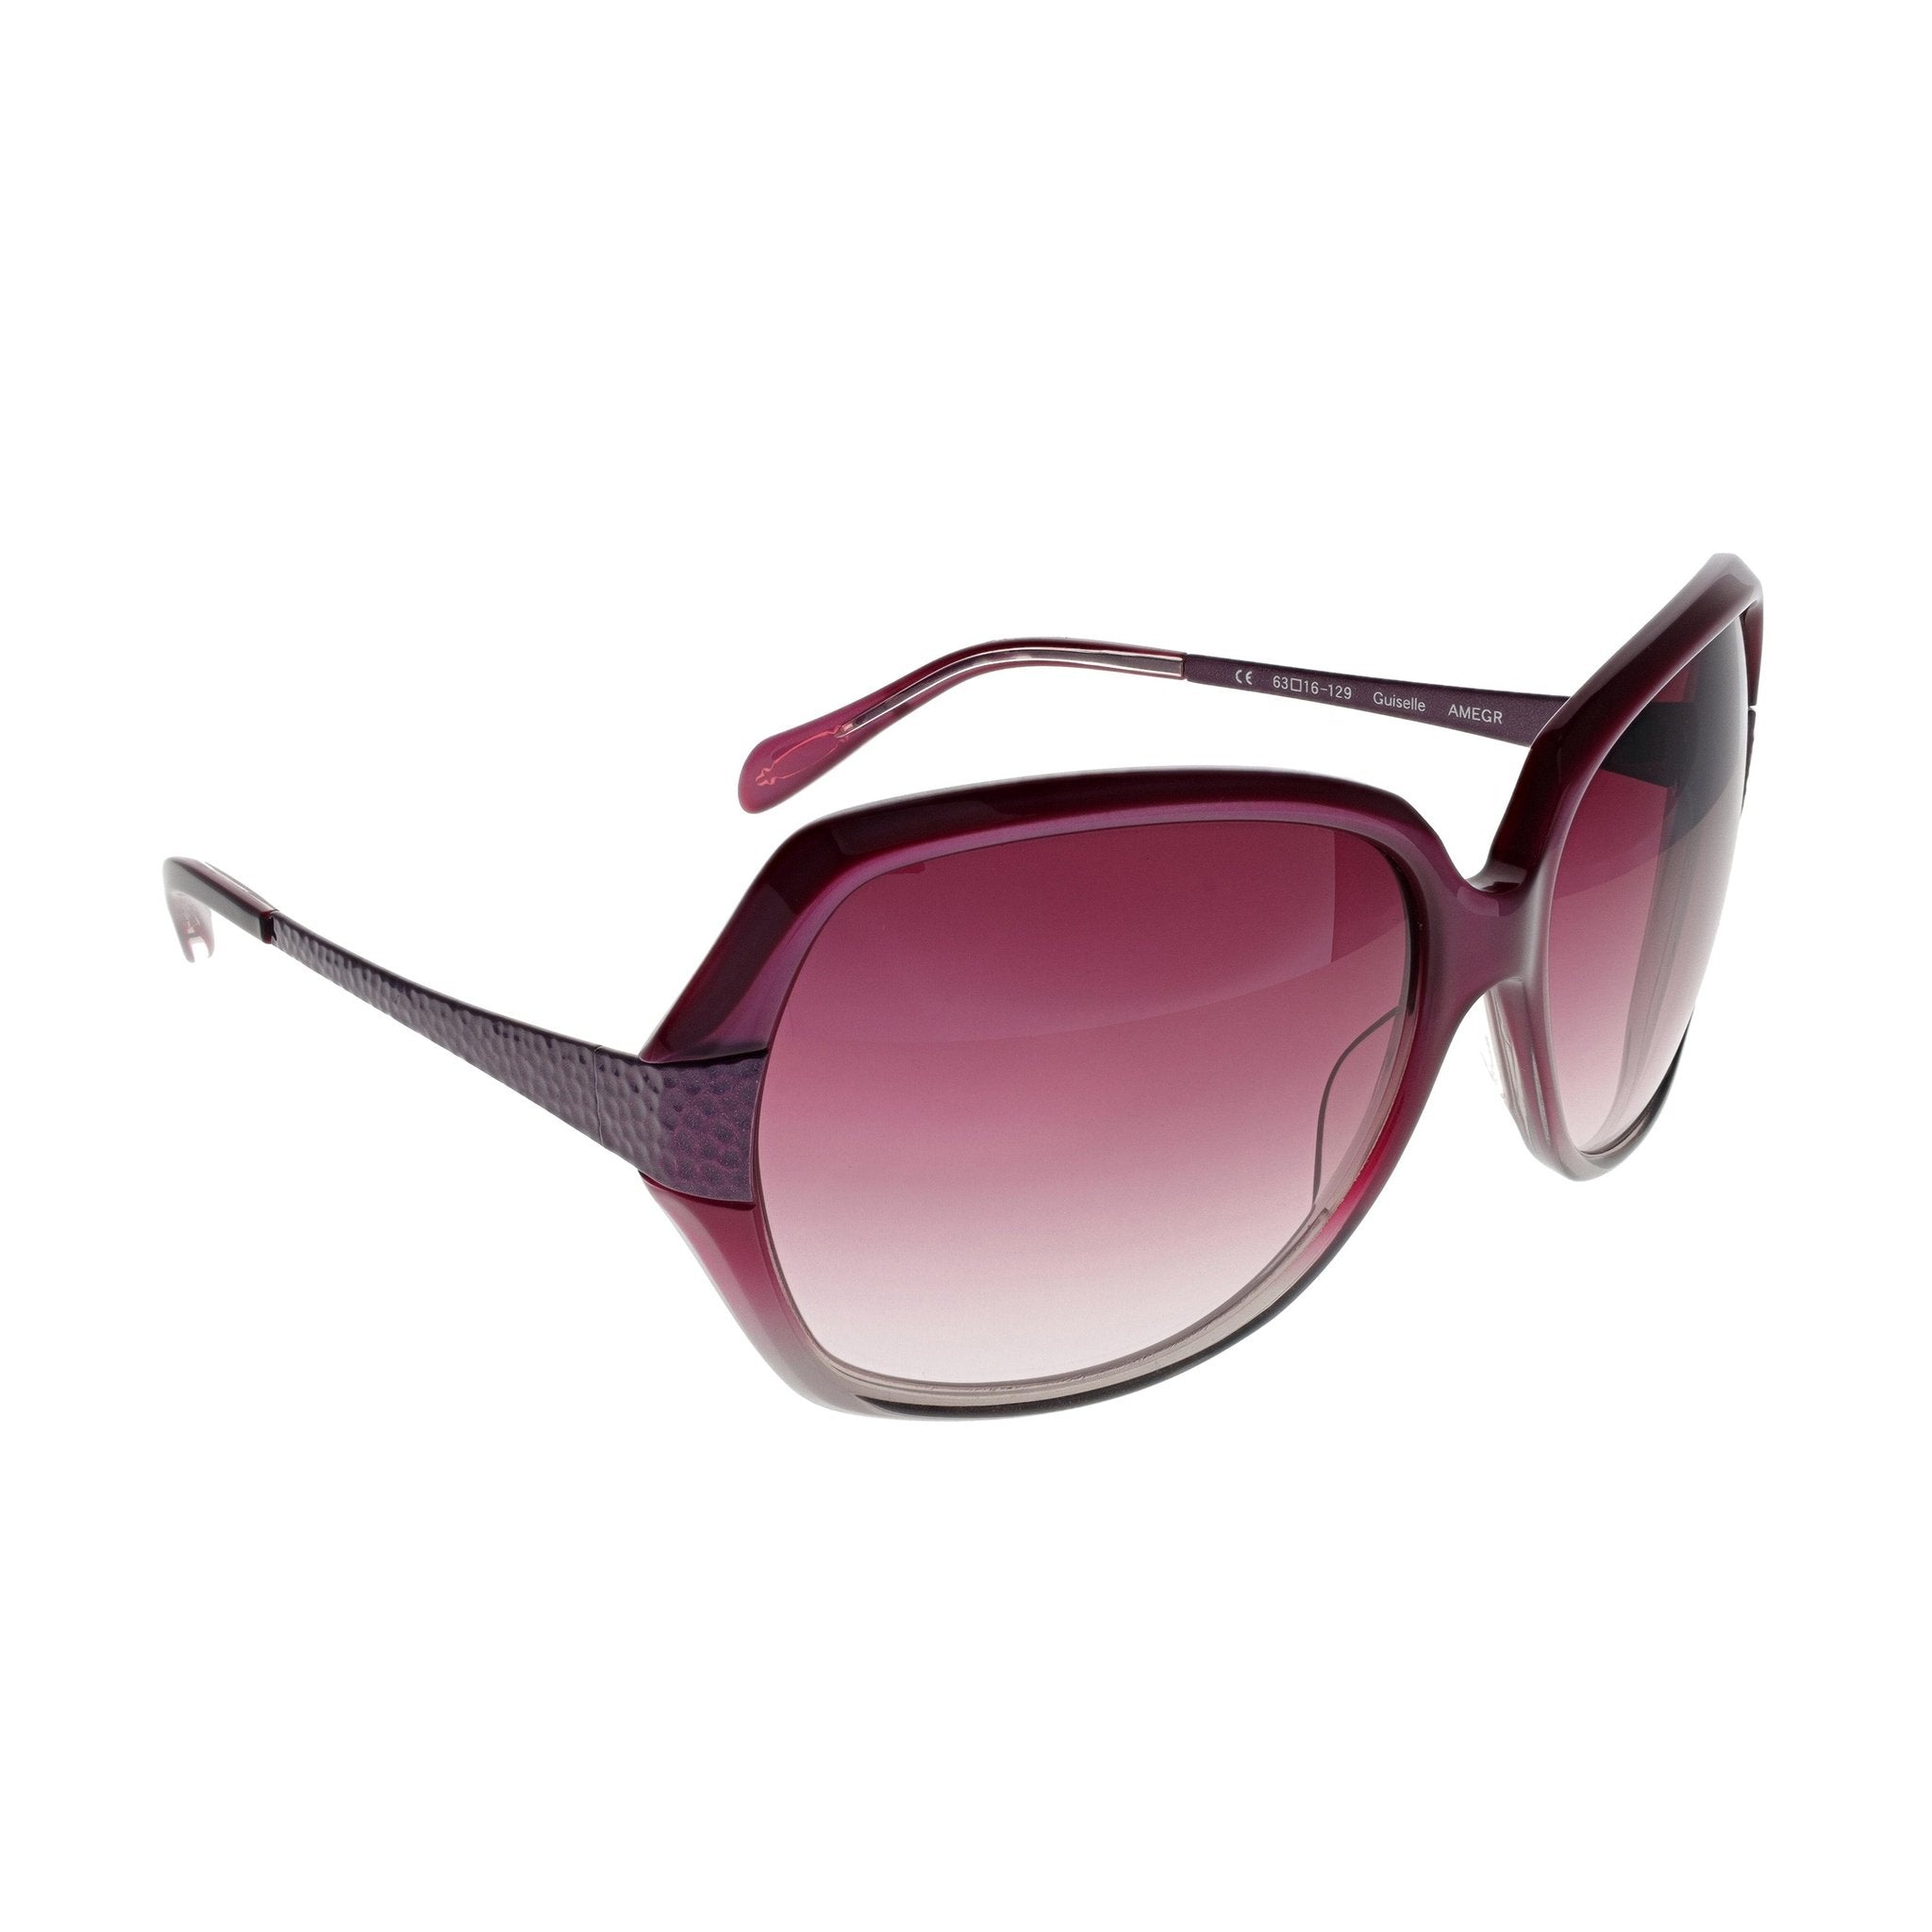 Oliver Peoples Guiselle Sunglasses - Amethyst